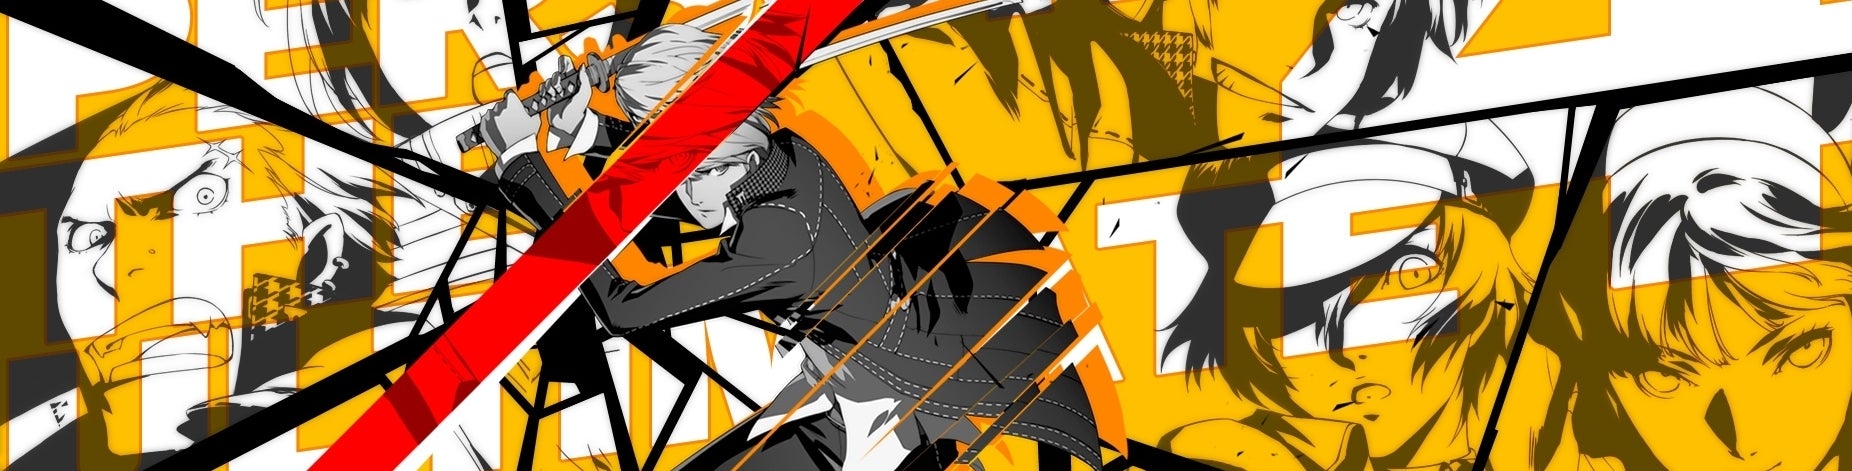 Image for Persona 4 Arena review